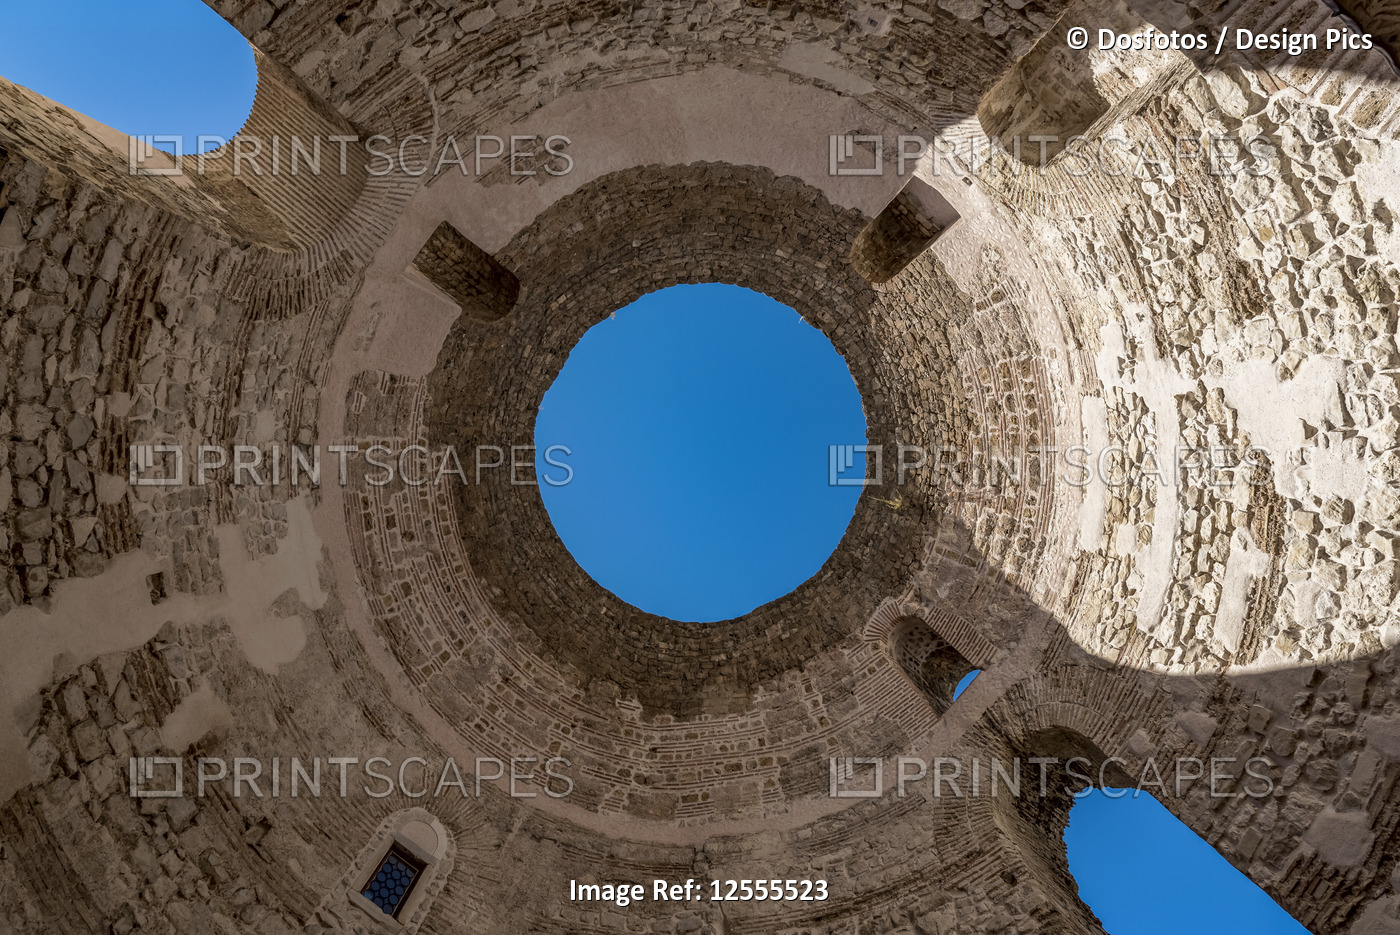 The Oculus, a hole in the roof of the Imperial audience hall of Diocletian's ...